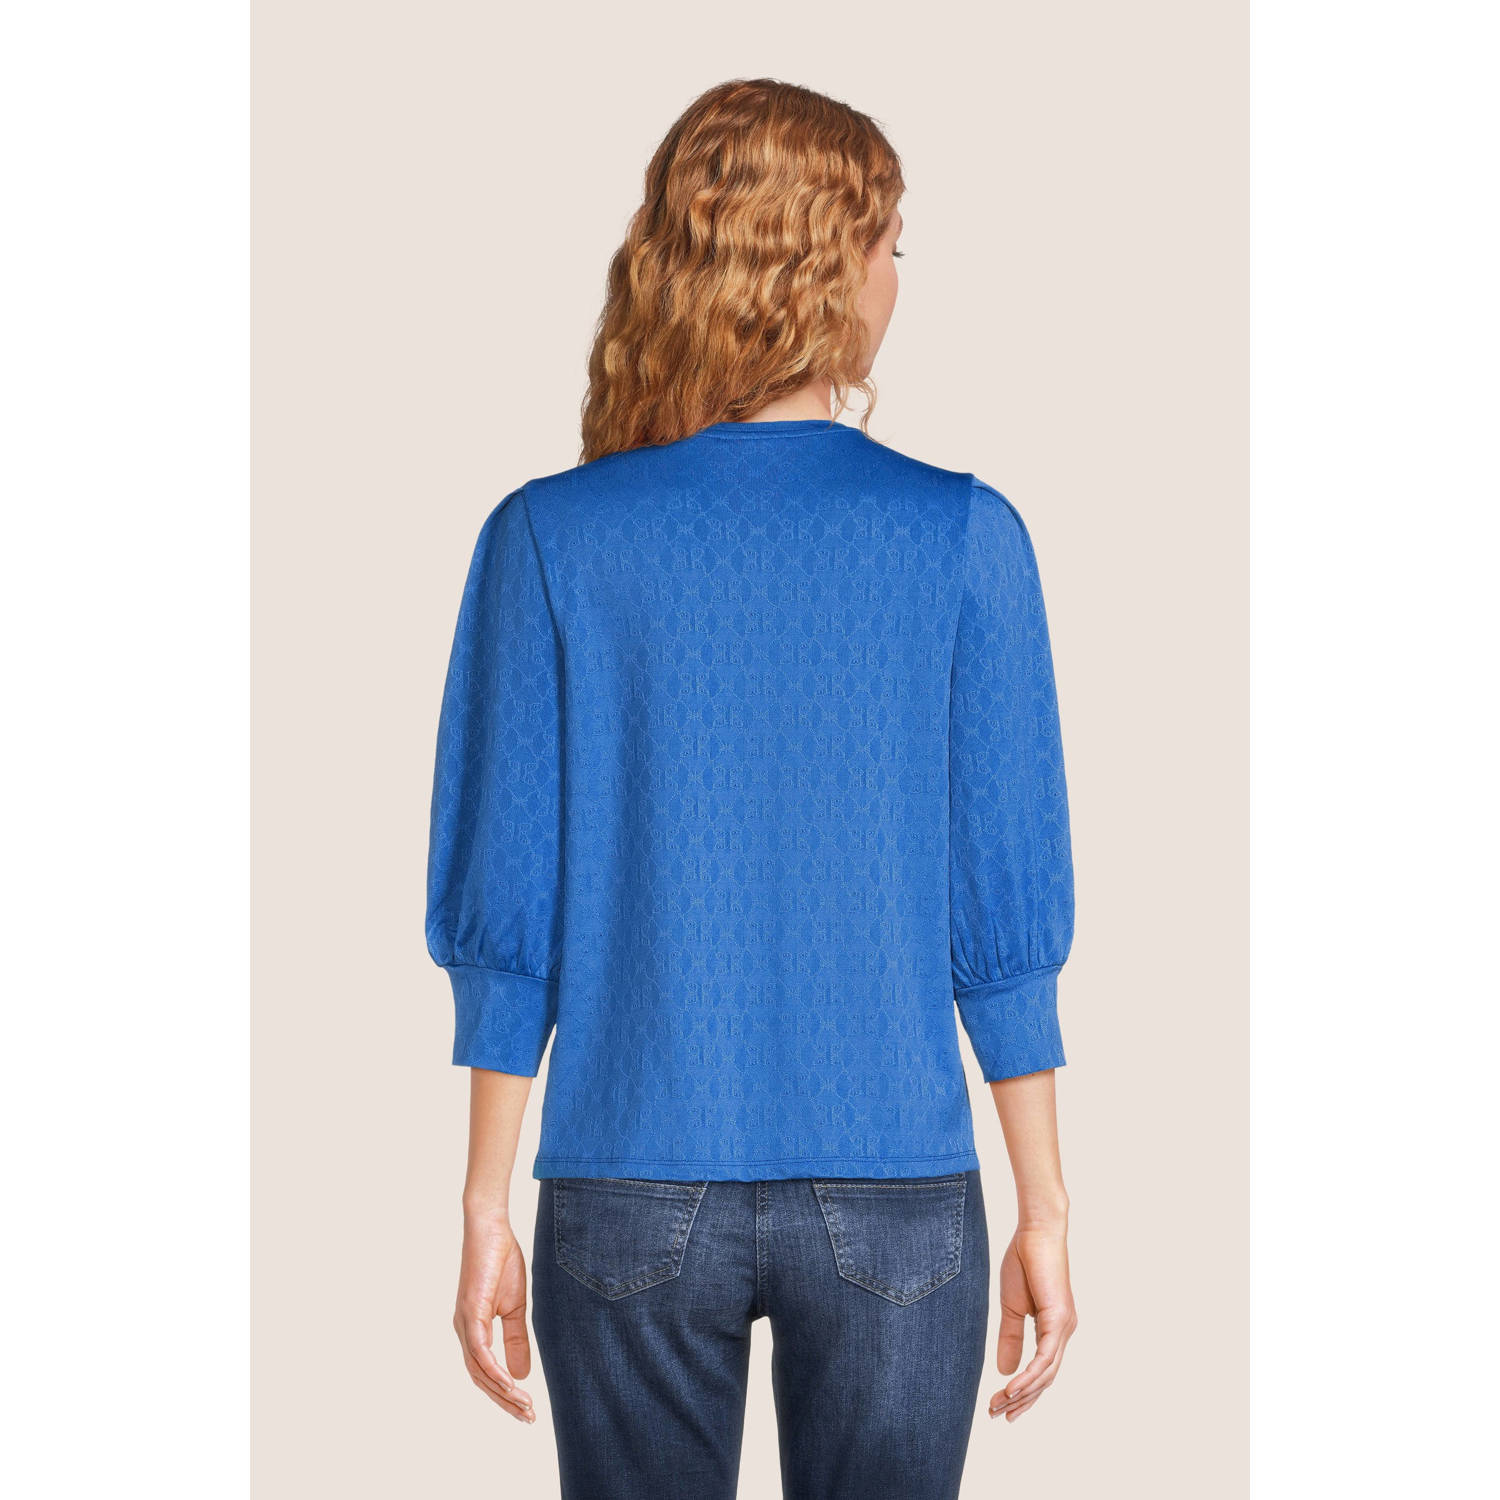 FREEQUENT top blauw